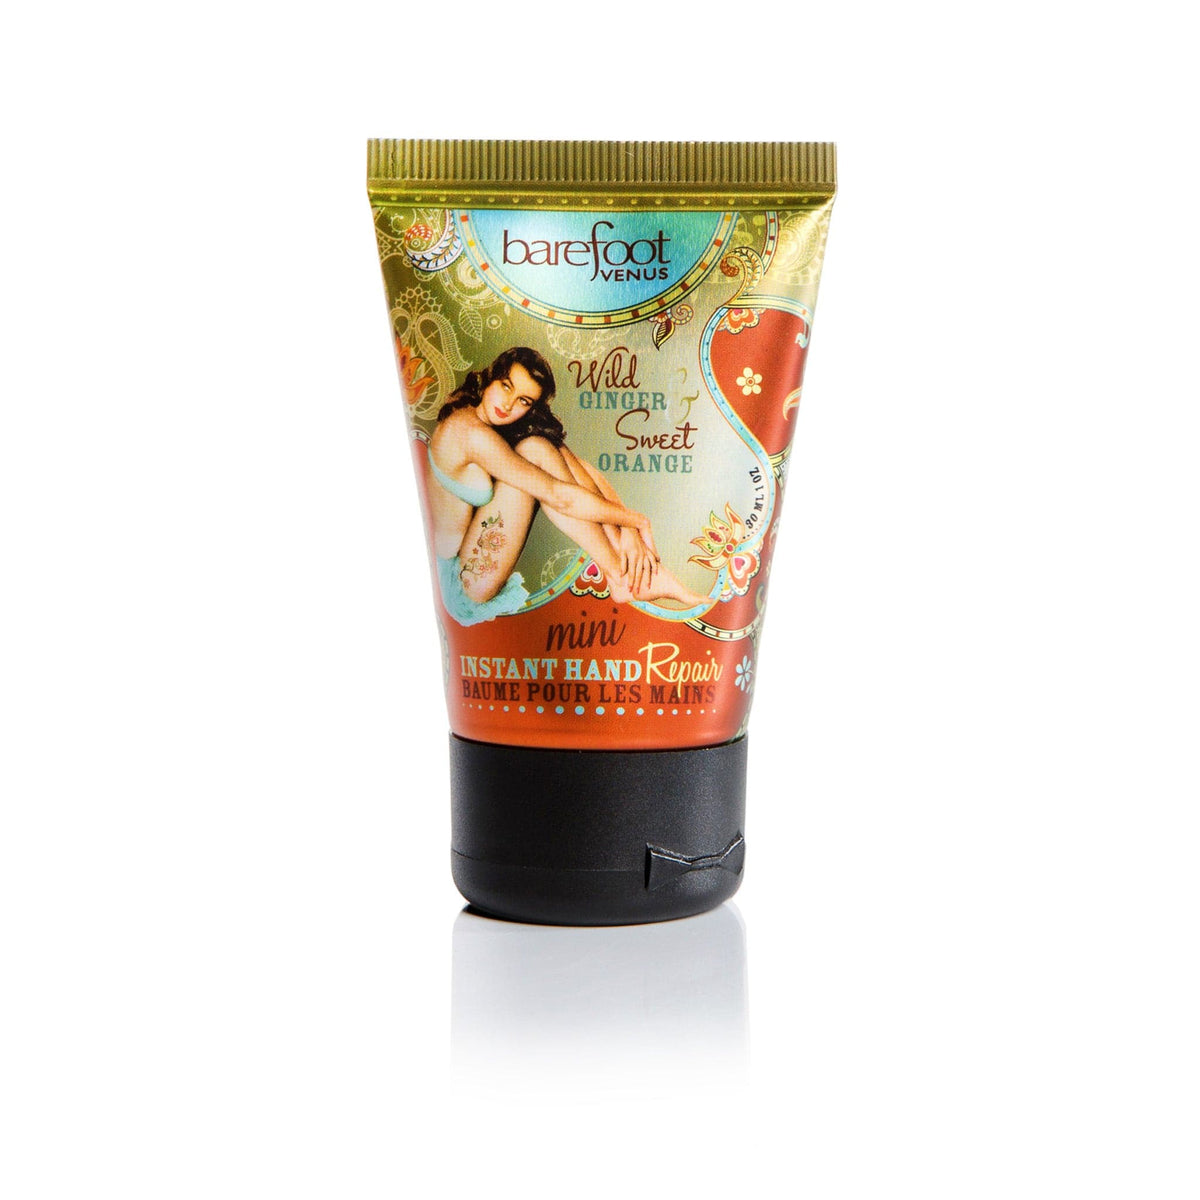 Mini Hand Repair ON-THE-GO. INTENSELY HYDRATING. Barefoot Venus